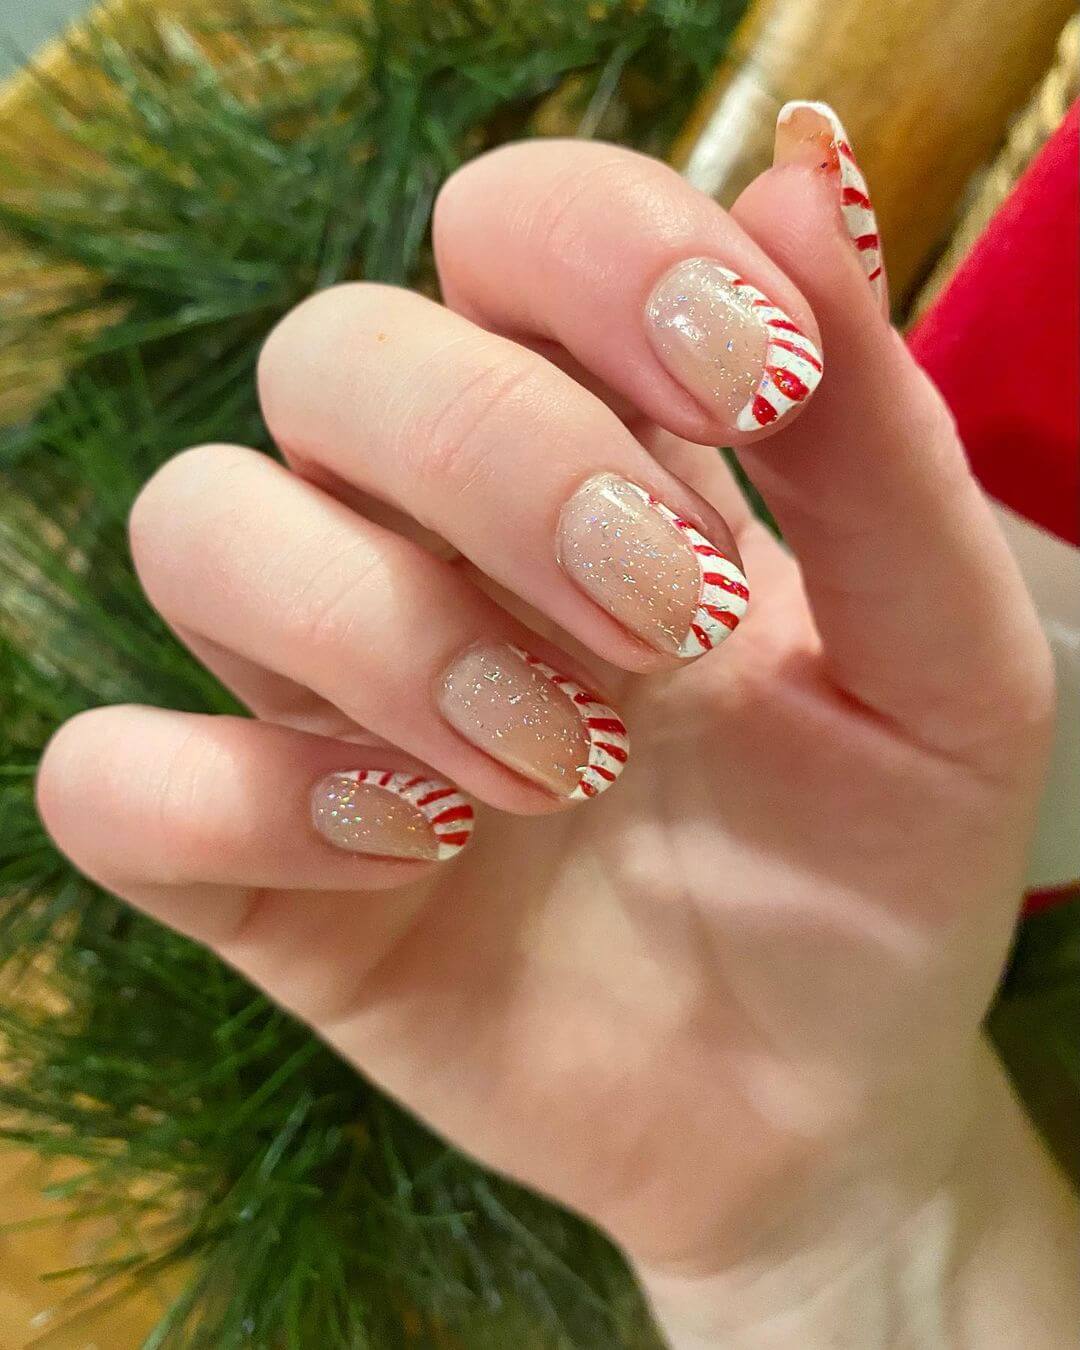 The Sparkly Candy Cane Nail Art Candy Cane Nail Art Designs for the Christmas Season